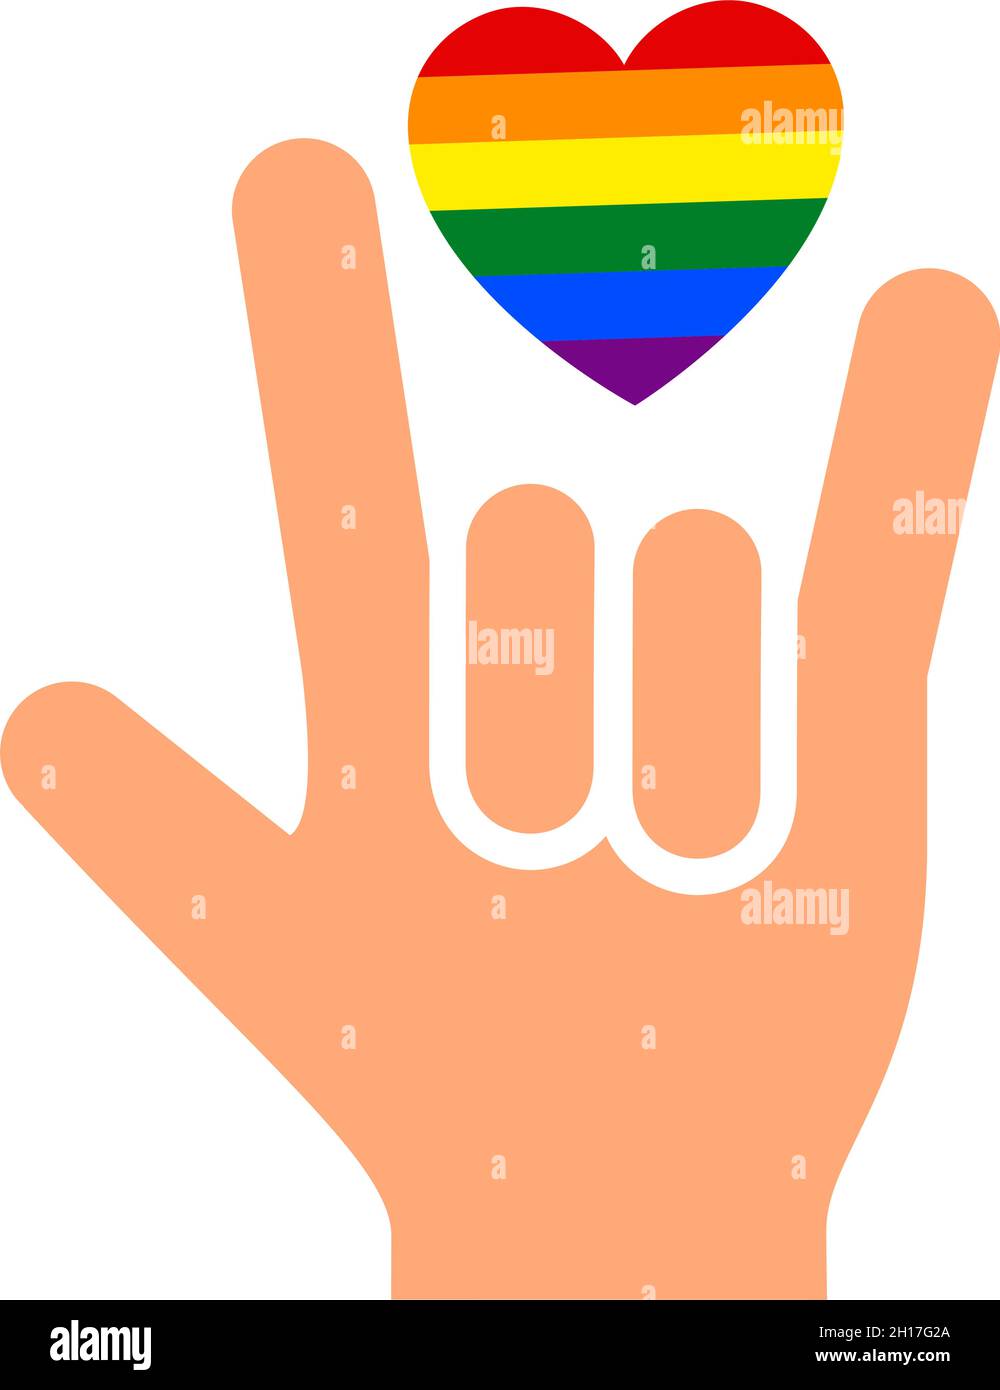 Hand Gesture Rock On With Heart And Flag Of Pride Lgbt Drawn Fingers Hold Symbol Lgbtq Stock